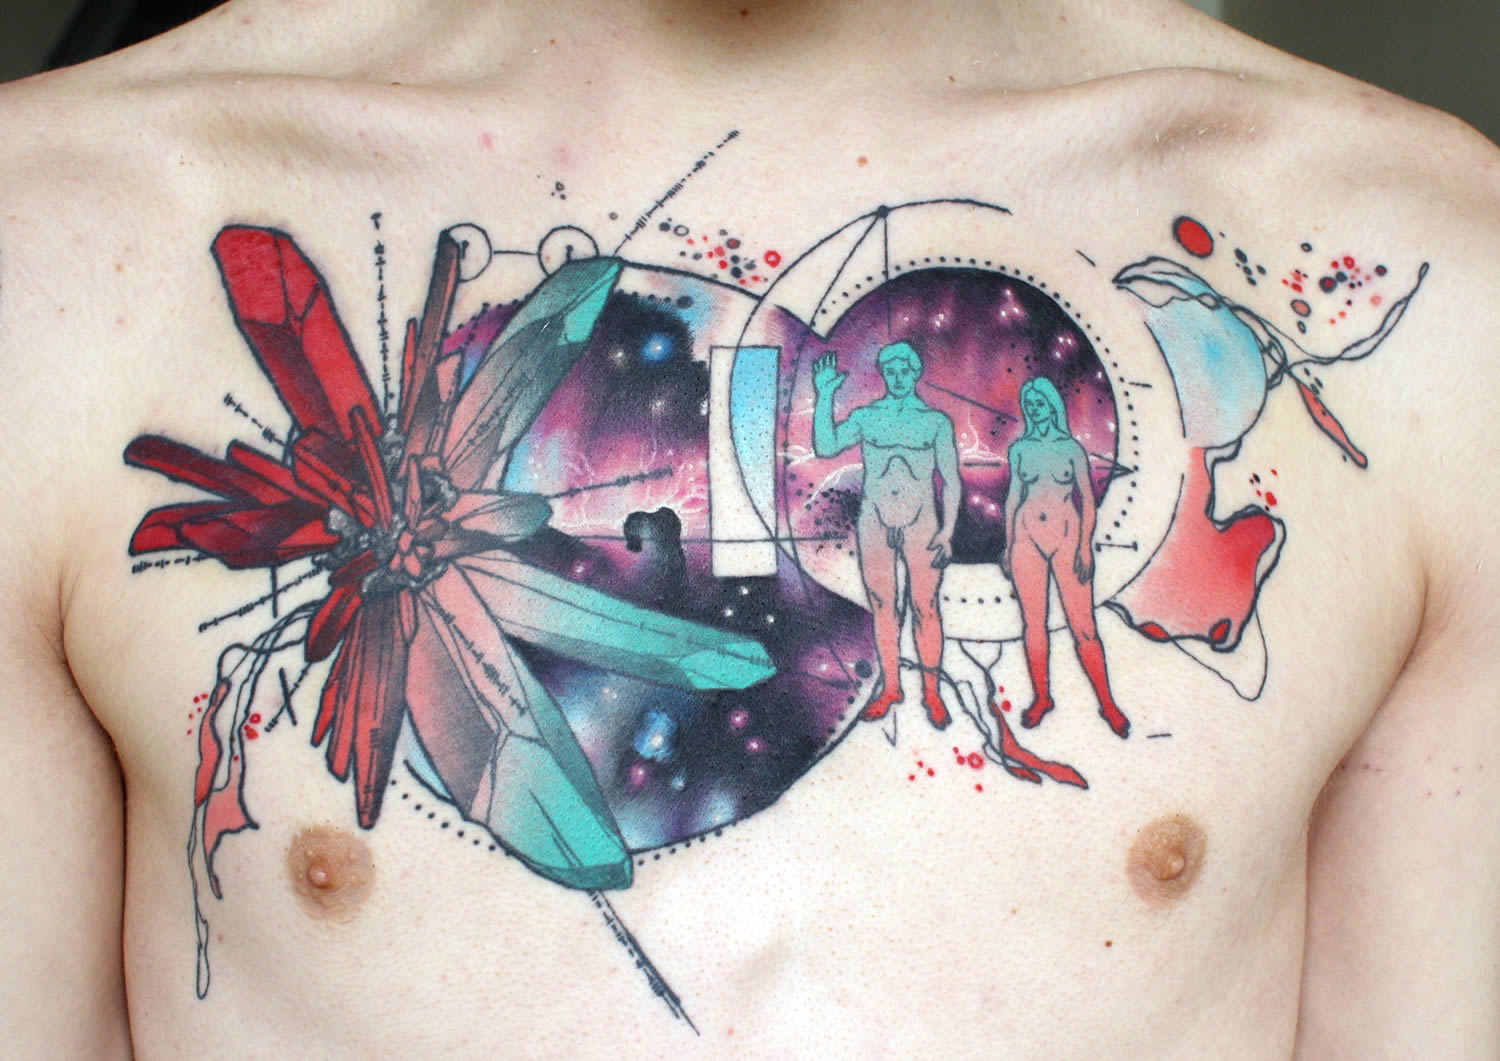 Watercolor Science And Nature Cosmic Tattoo On Chest By Cody Eich